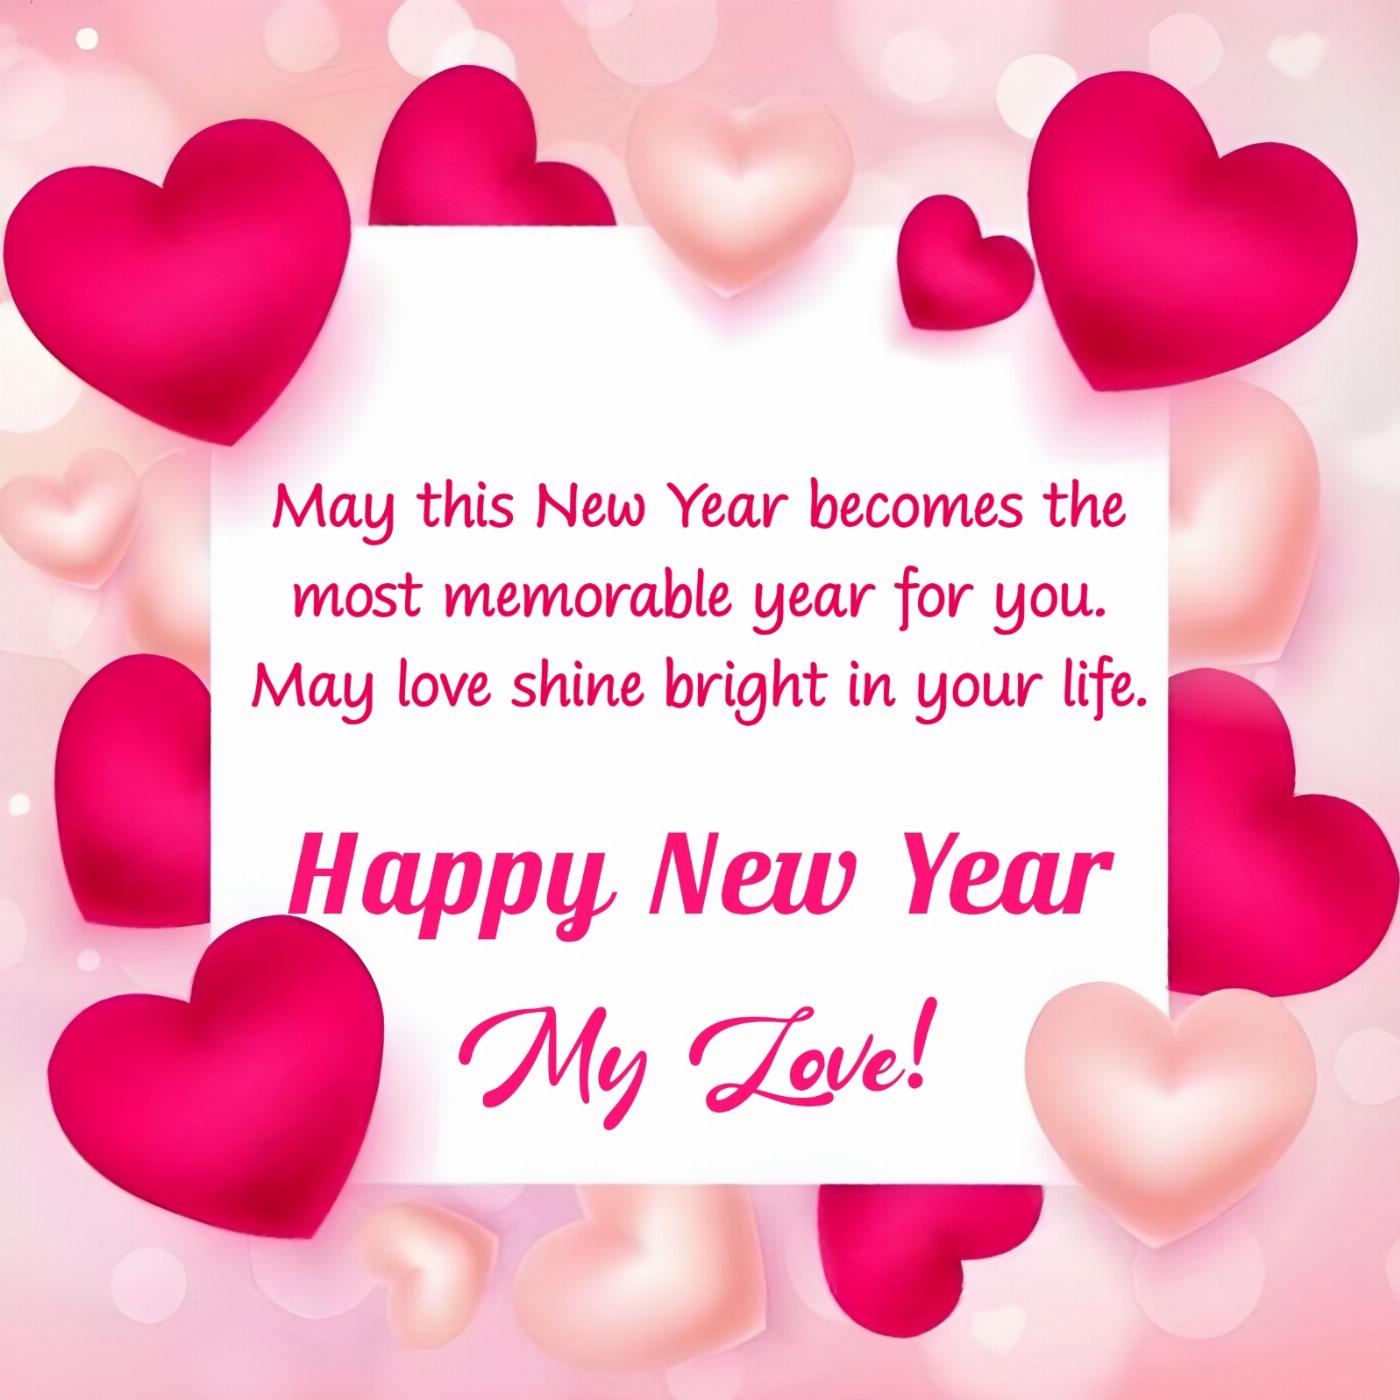 May this New Year becomes the most memorable year for you